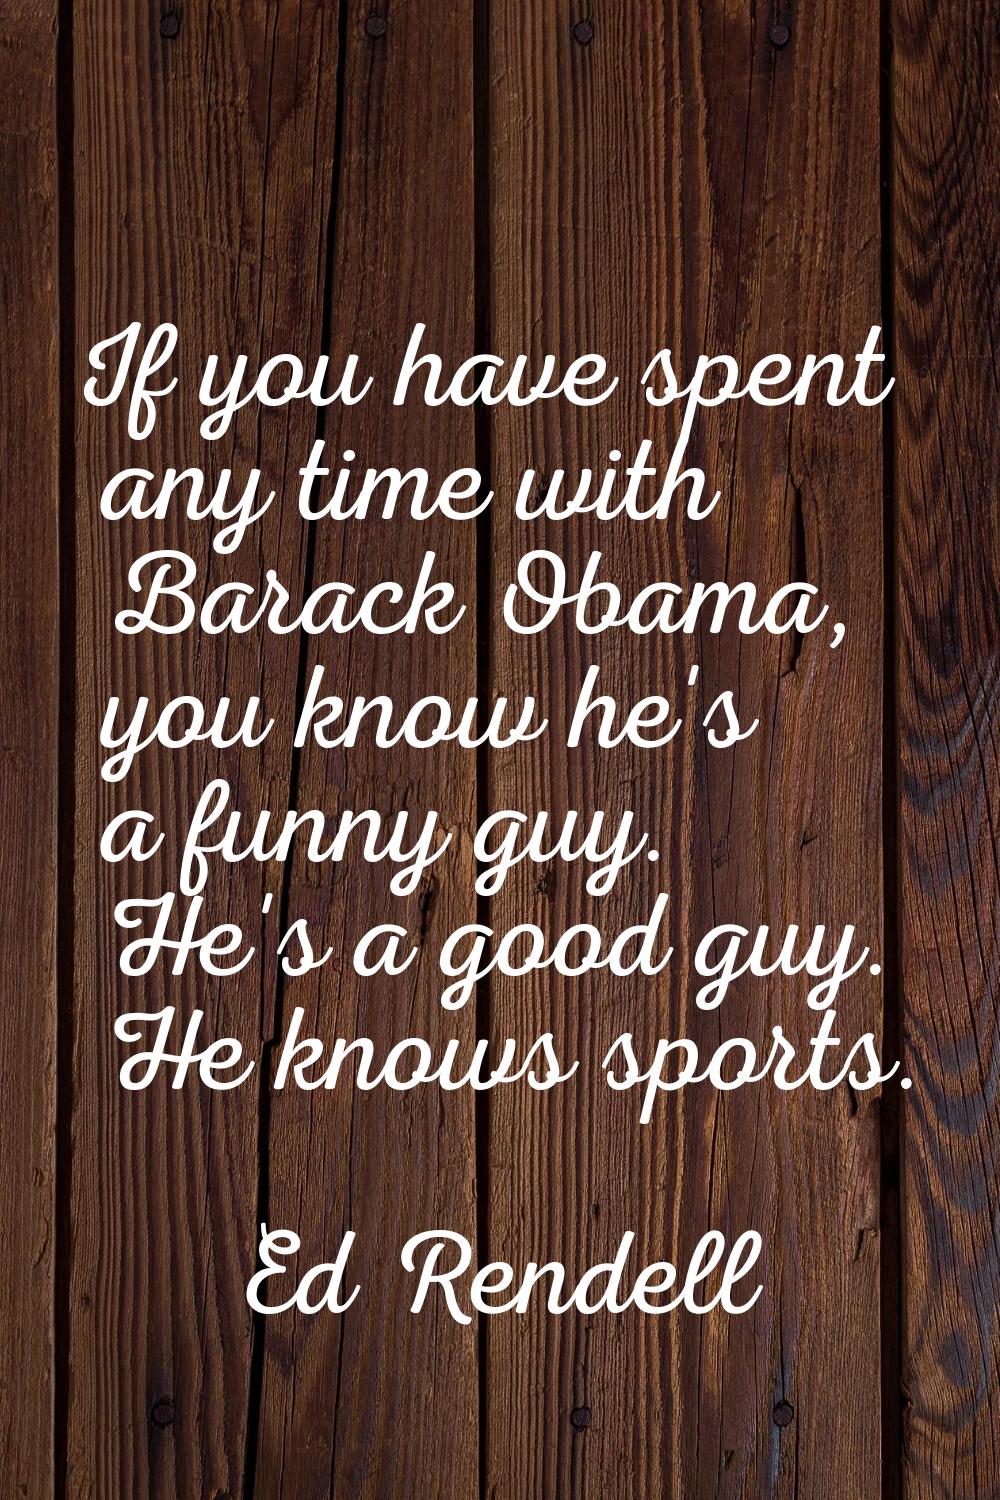 If you have spent any time with Barack Obama, you know he's a funny guy. He's a good guy. He knows 